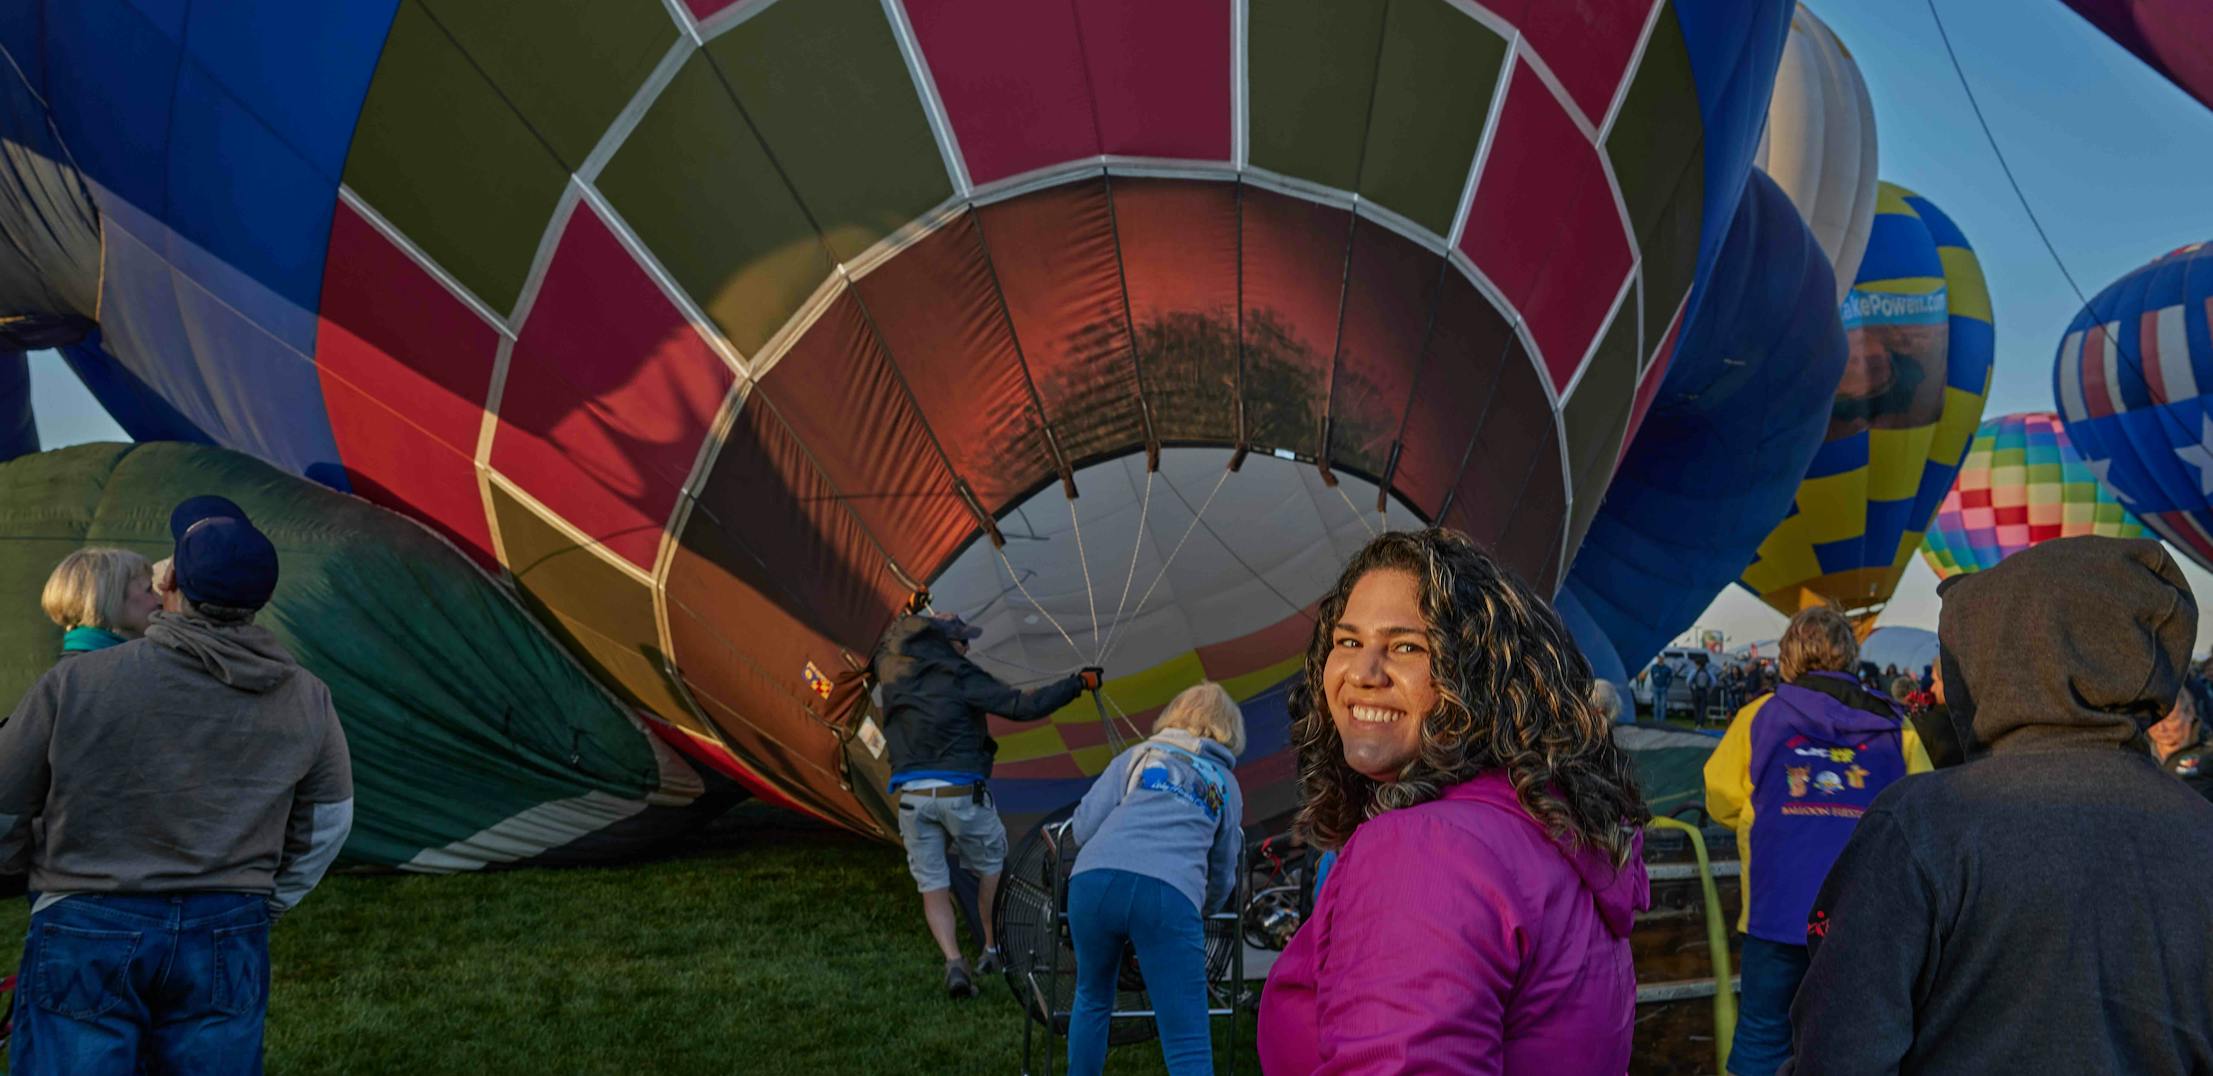 Surna Barton smiling in front of a hot air balloon.